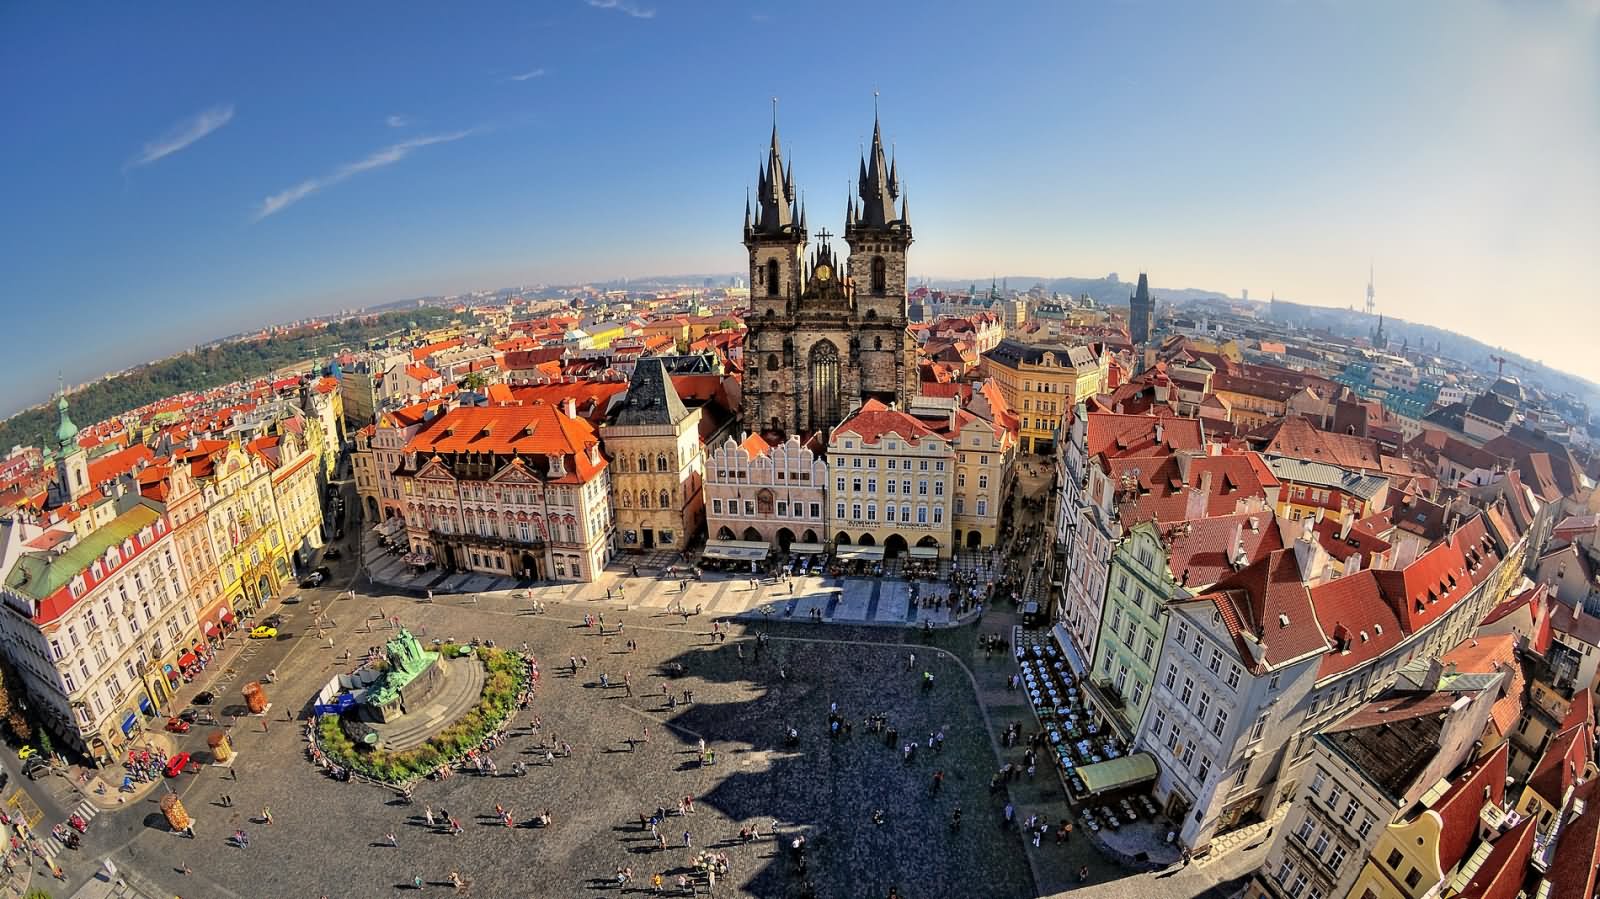 Amazing Picture Of The Old Town Square, Prague, Czech Republic